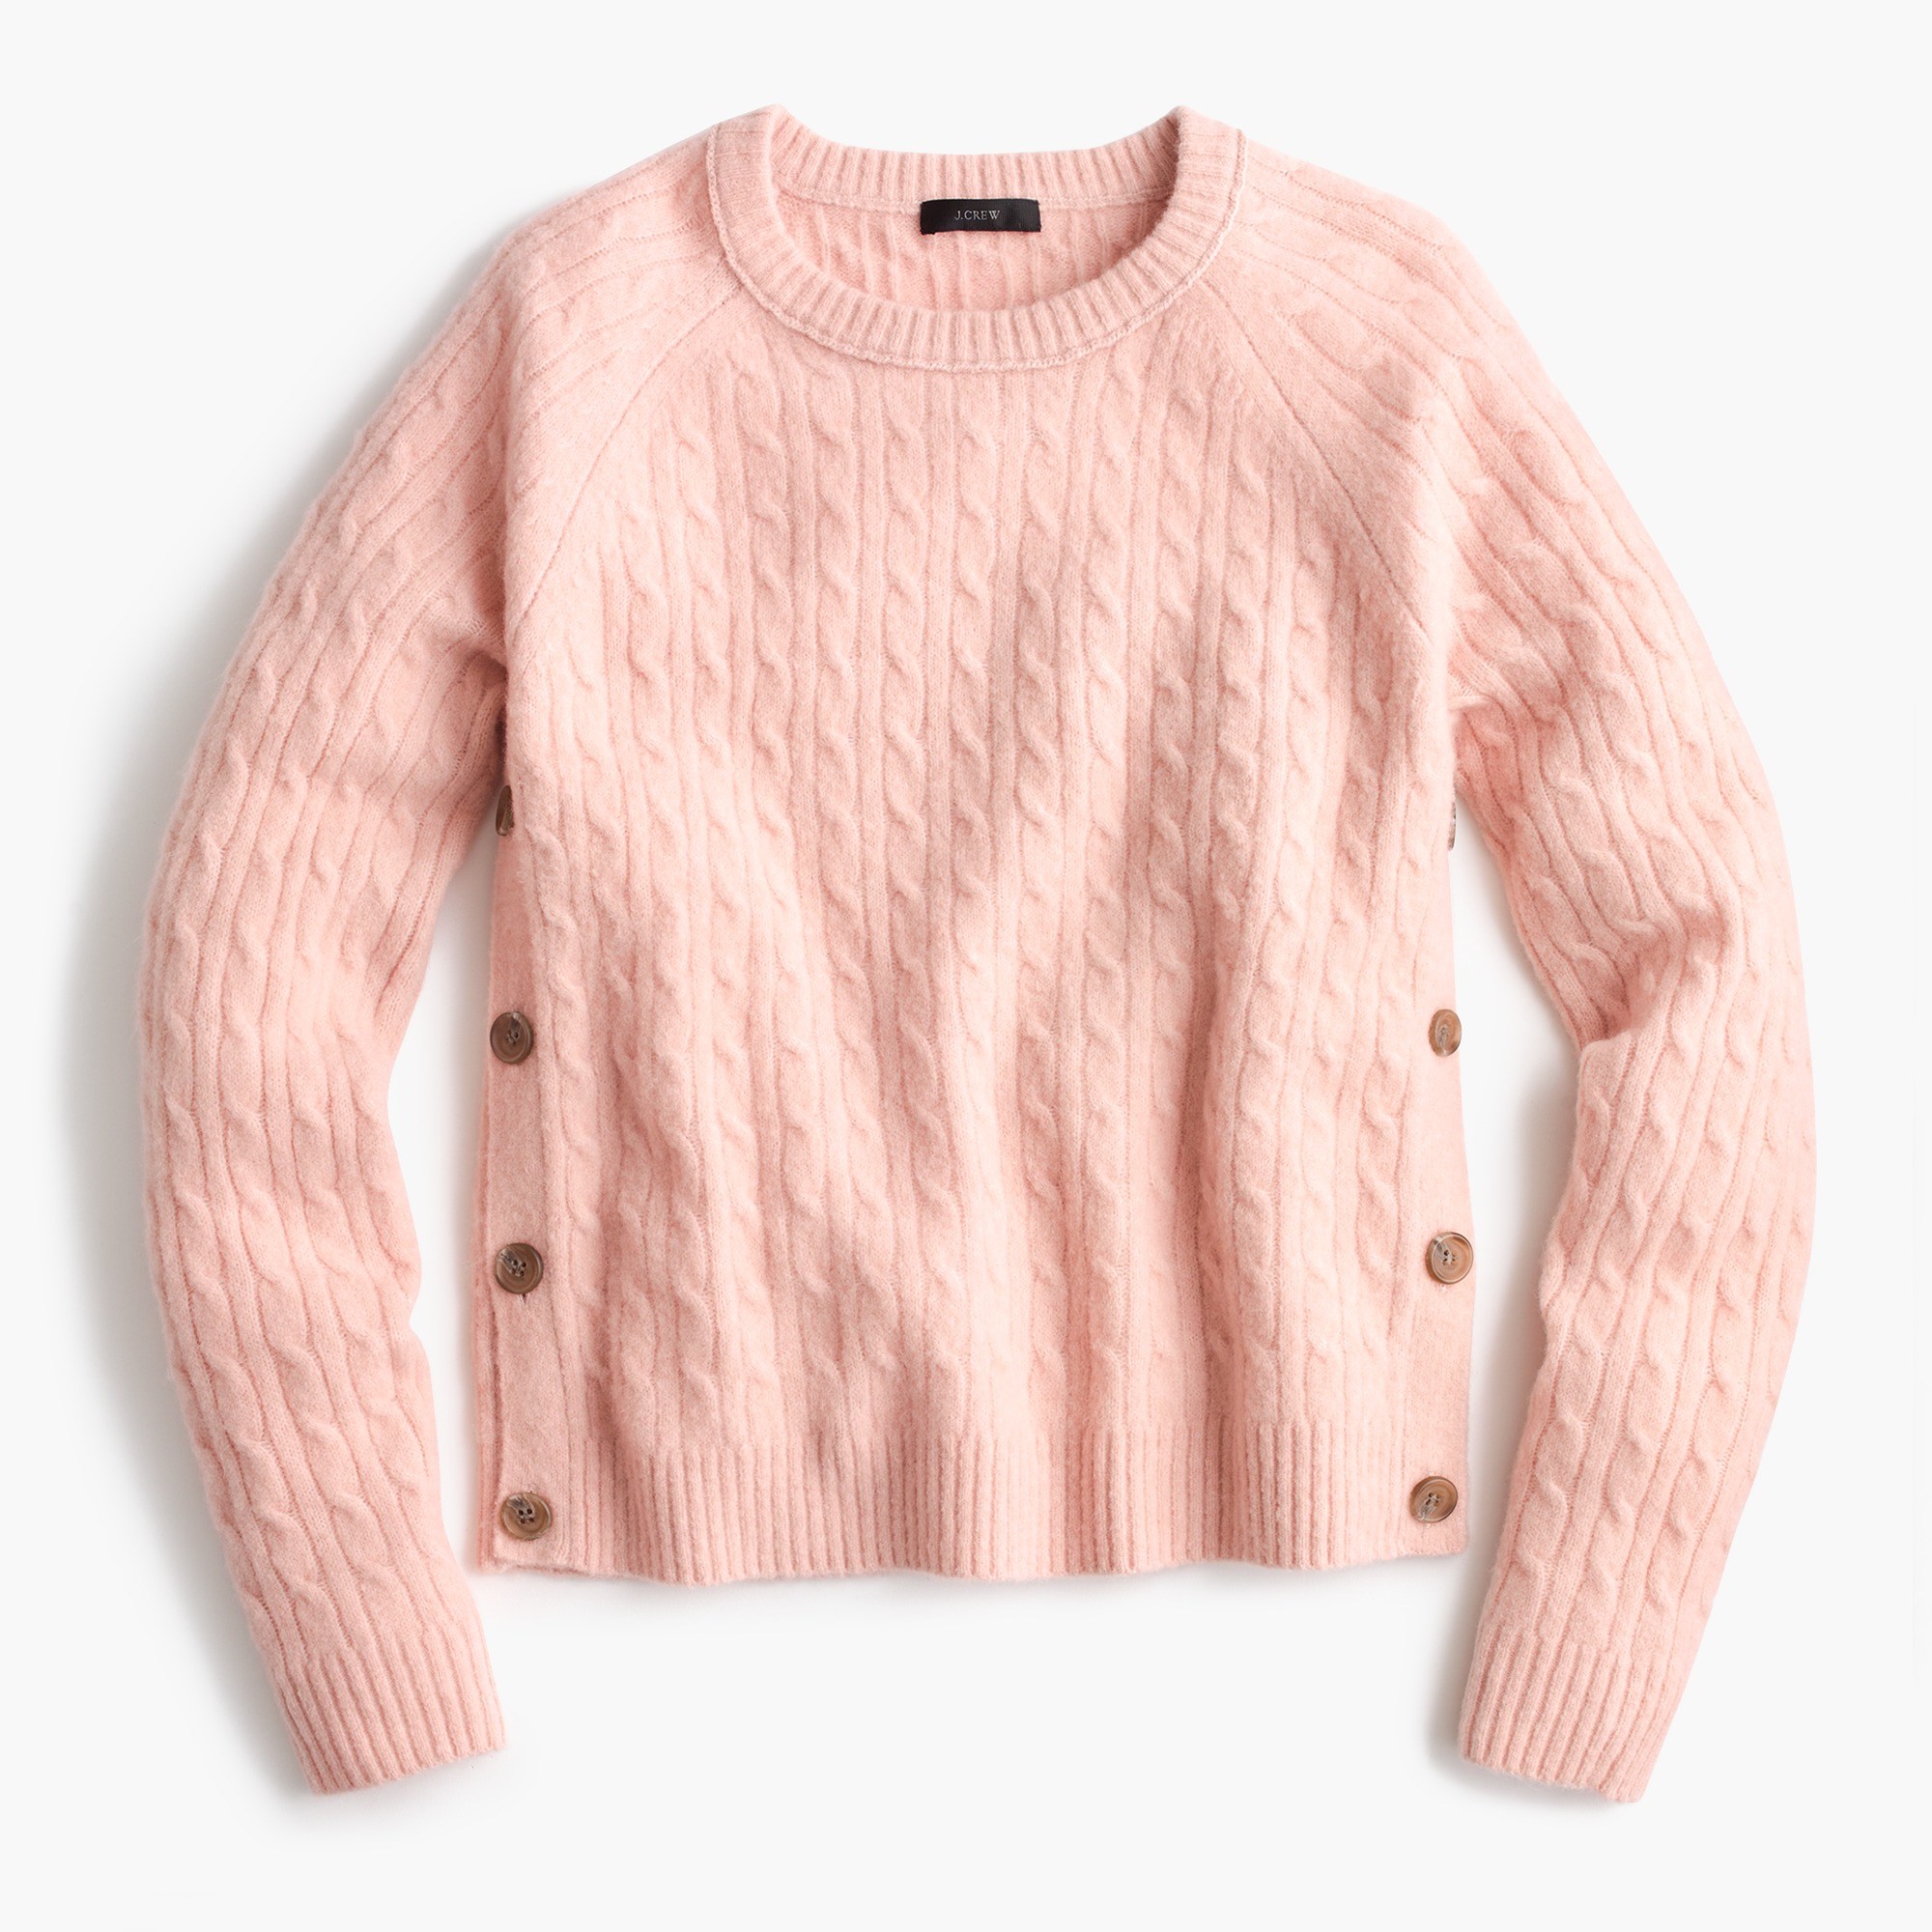 cable-knit sweater with buttons : women pullovers